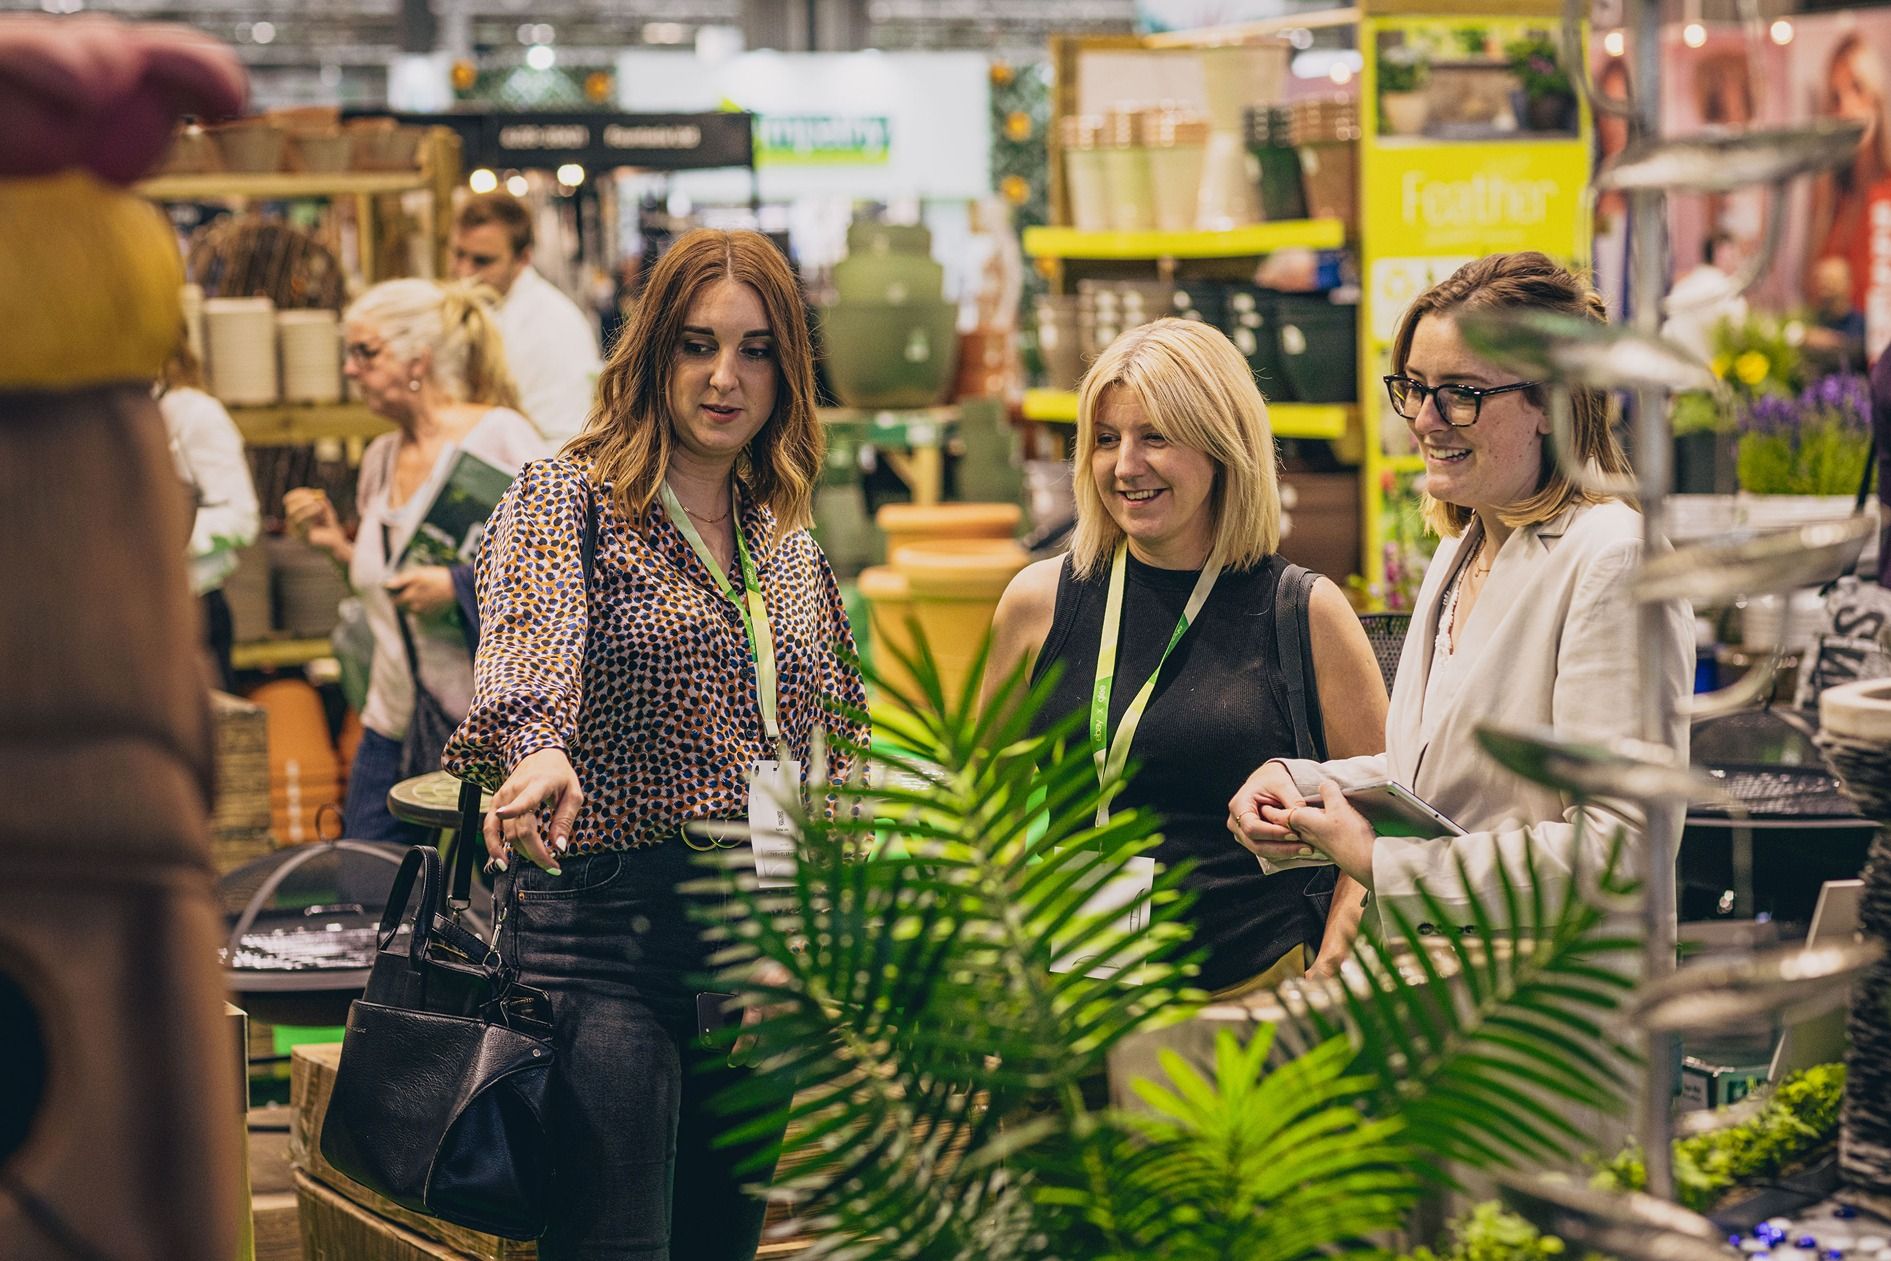 Discover exhibitors from around the world